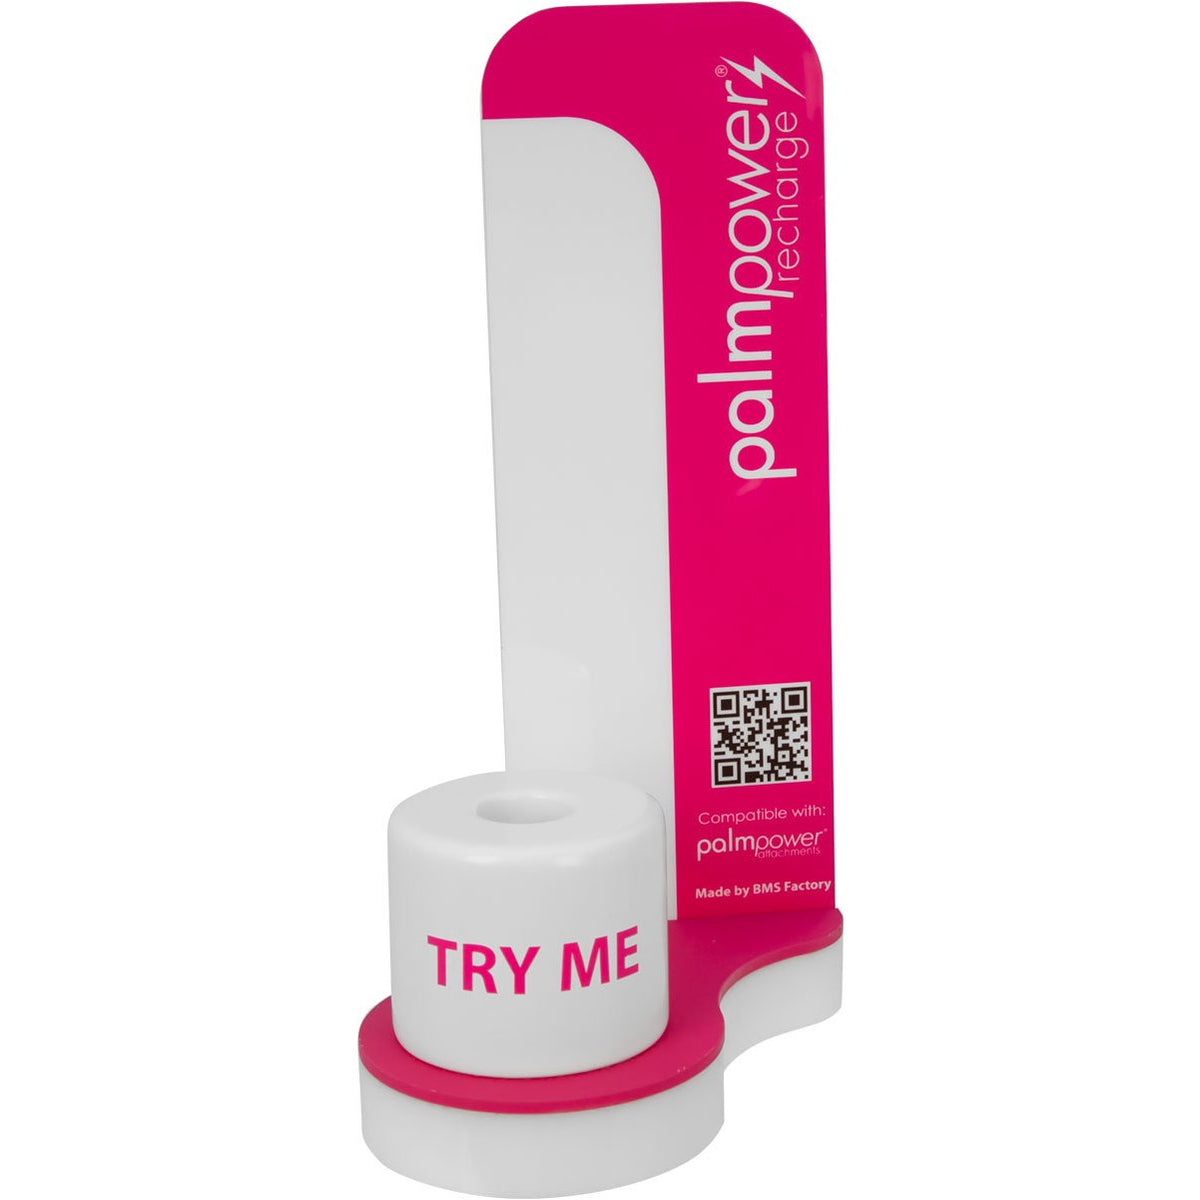 PalmPower Recharge Retail Kit * 1 Per Store * MUST be with purchase of PalmPower Recharge